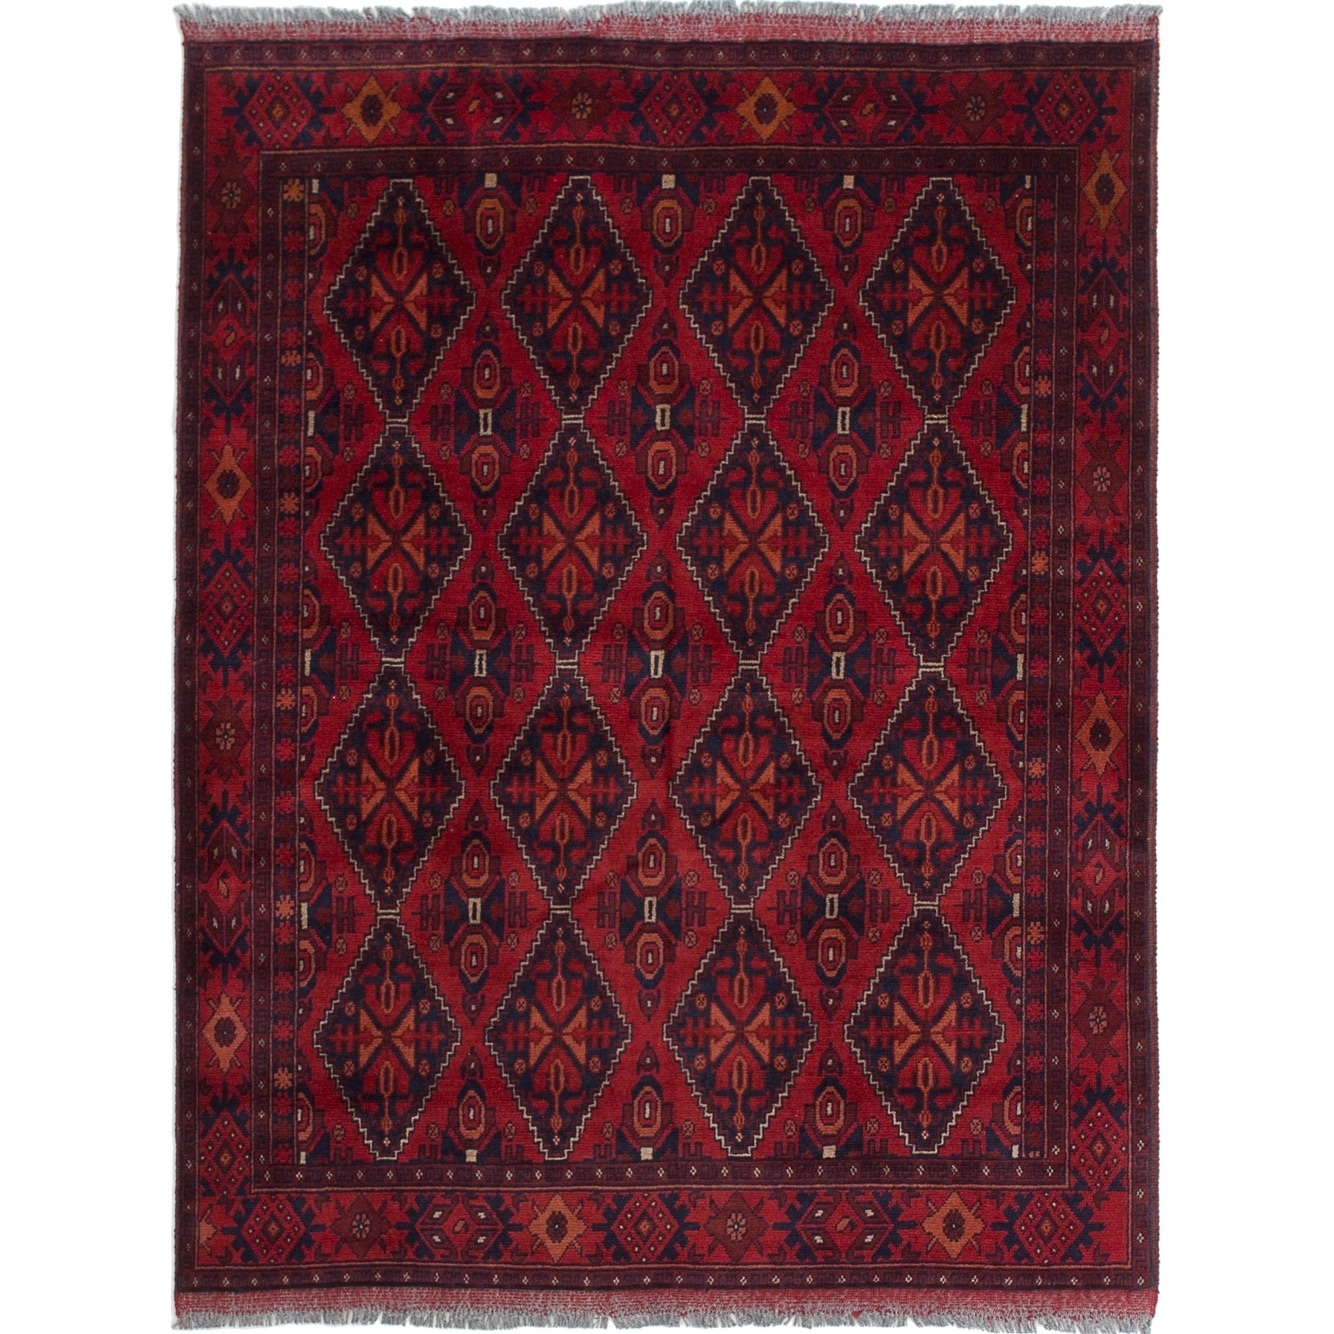 eCarpetGallery Hand-knotted Finest Khal Mohammadi Red Wool Rug - 4'11 x 6'6